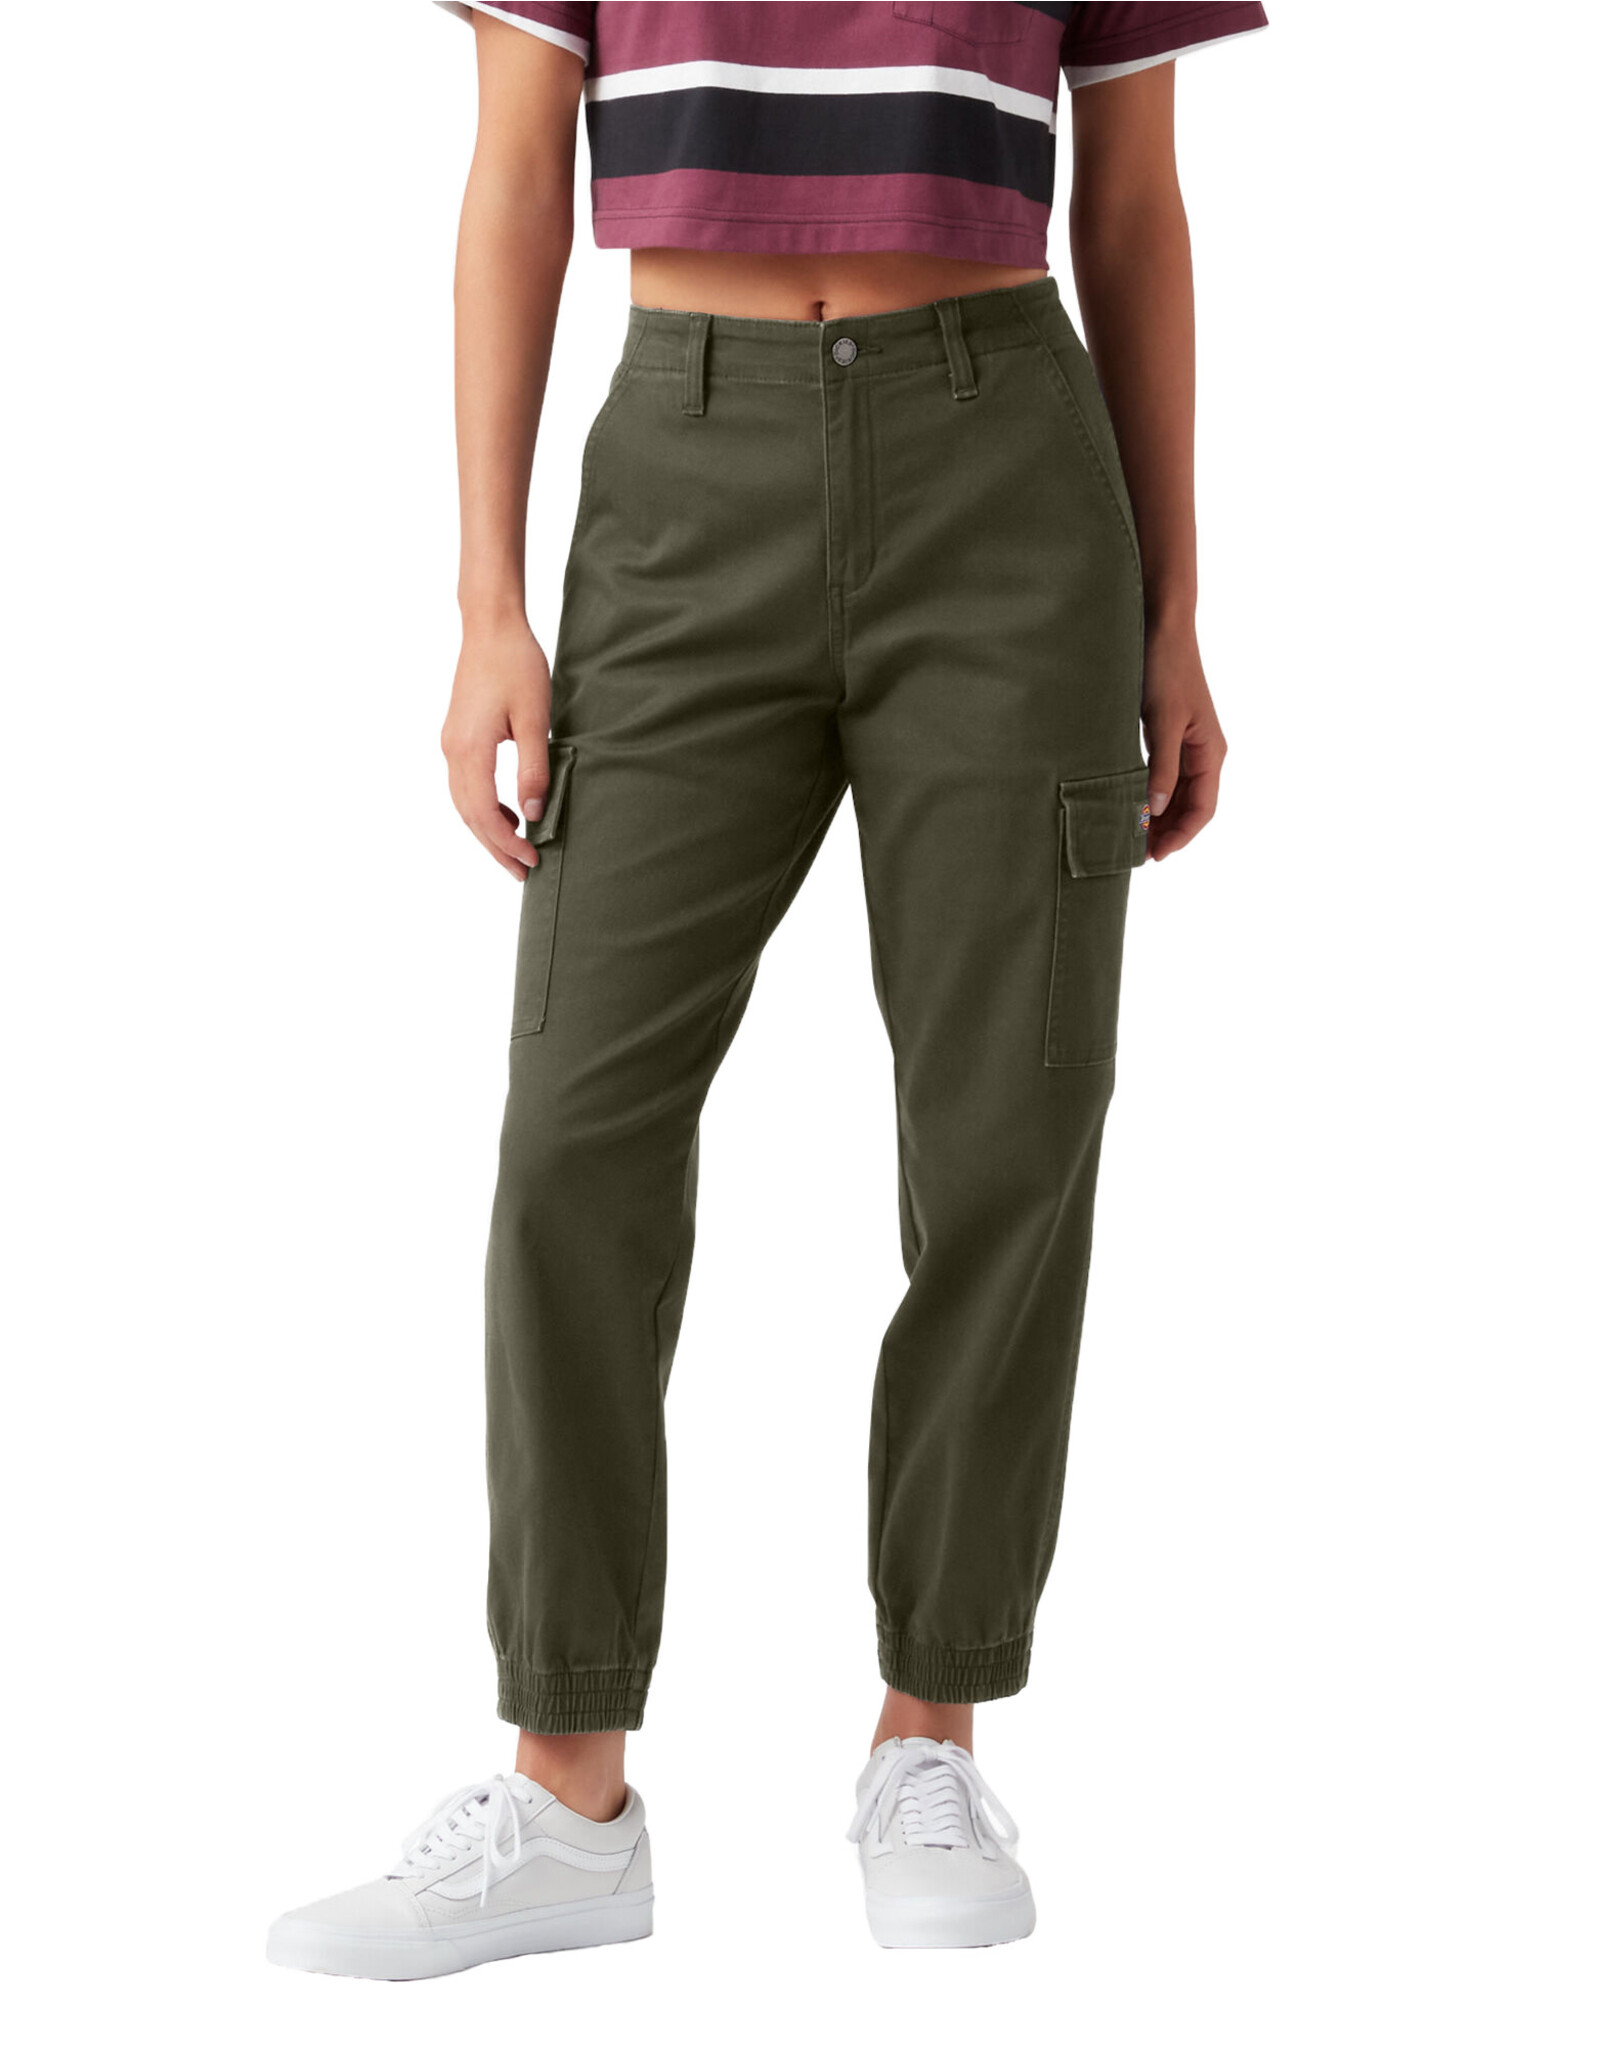 DICKIES Women's High Rise Fit Cargo Jogger Pants Miliary Green - FPR54ML